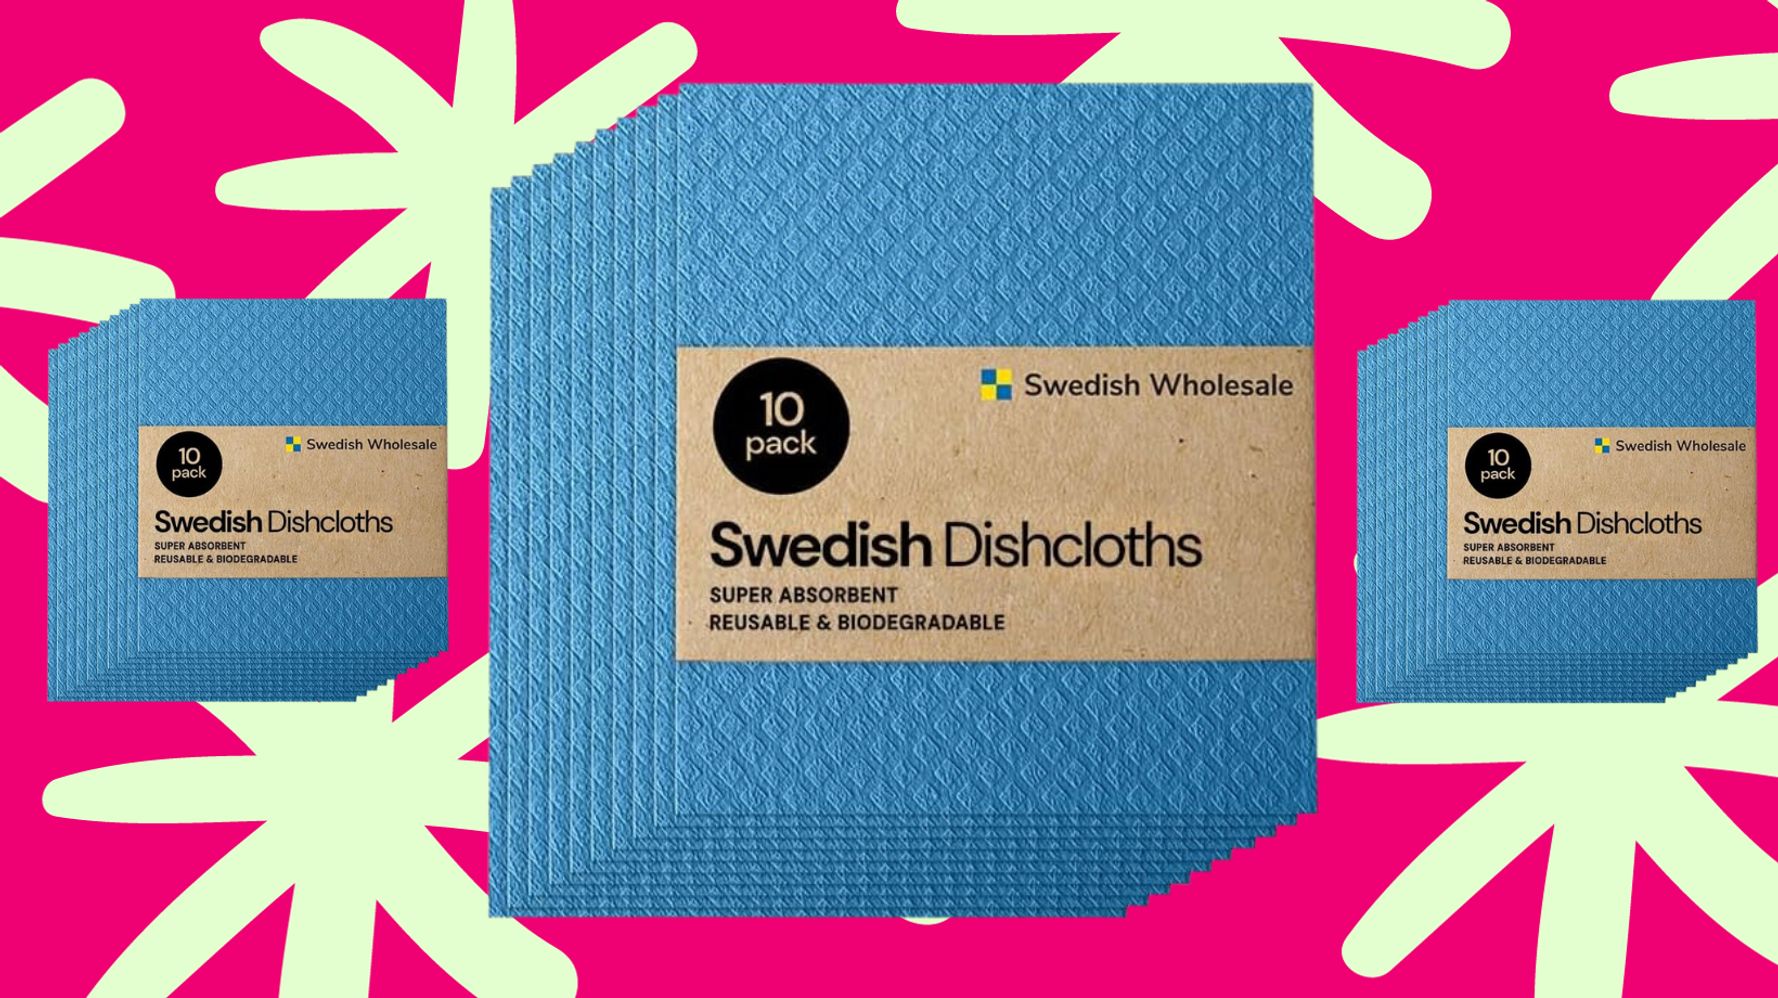 Swap Your Paper Towels For A Pack Of Swedish Dishcloths At 20% Off